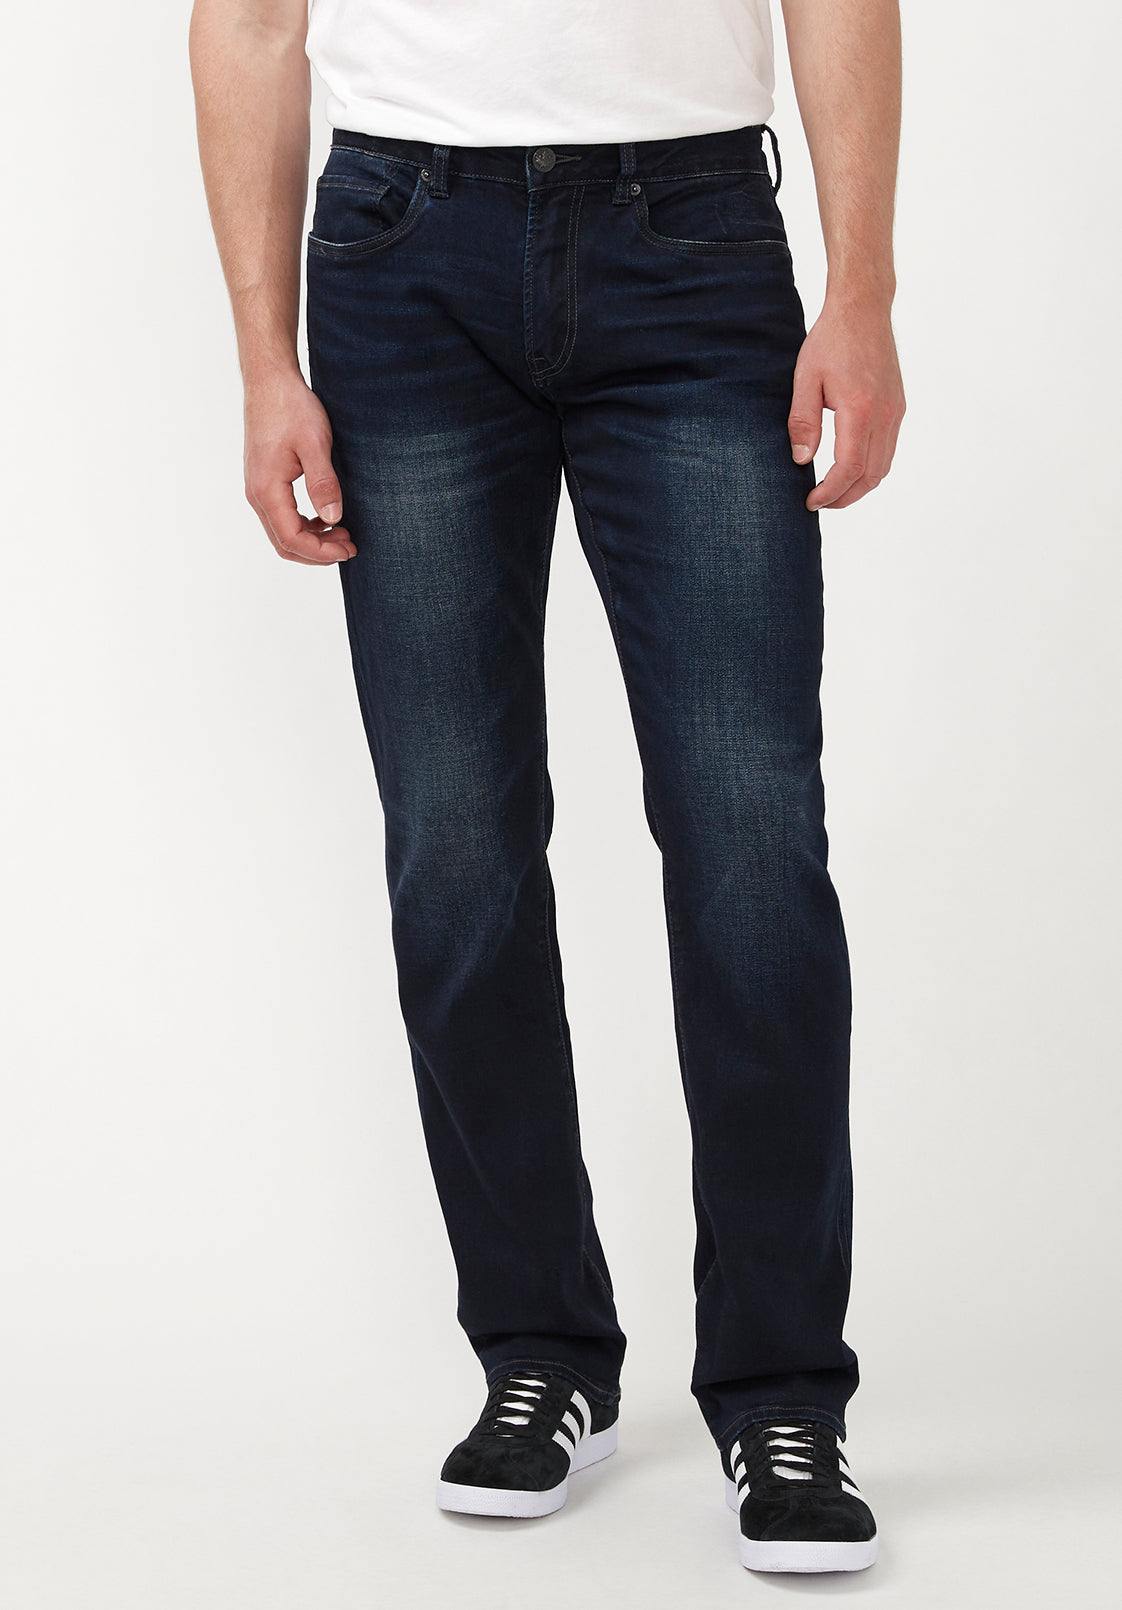 Straight Six Men's Jeans in Authentic and Deep Indigo – Buffalo Jeans - US